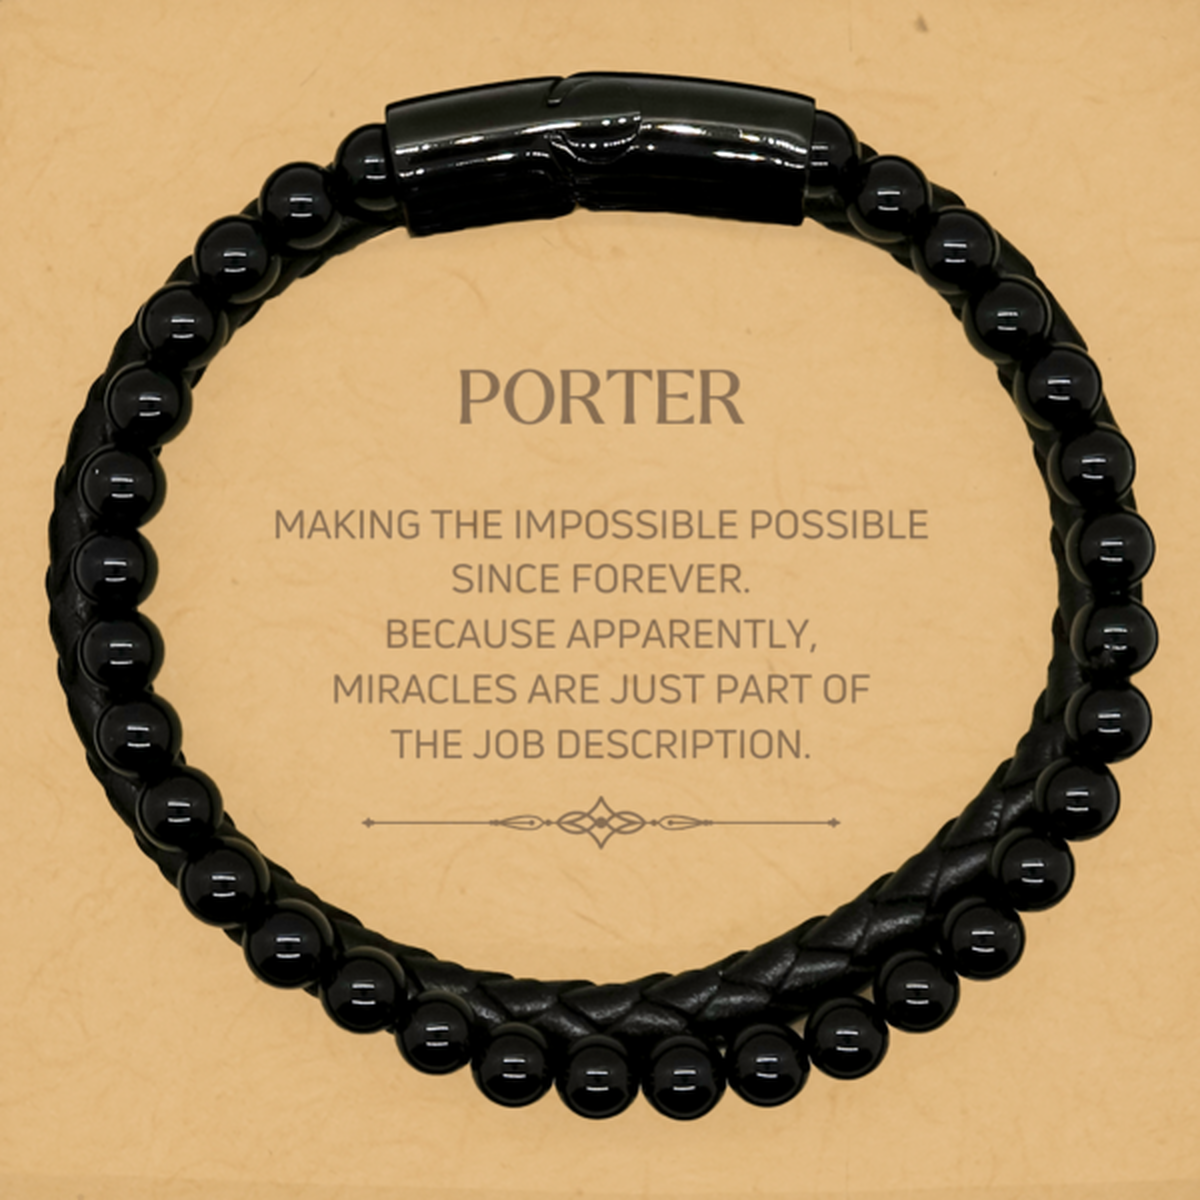 Funny Porter Gifts, Miracles are just part of the job description, Inspirational Birthday Stone Leather Bracelets For Porter, Men, Women, Coworkers, Friends, Boss